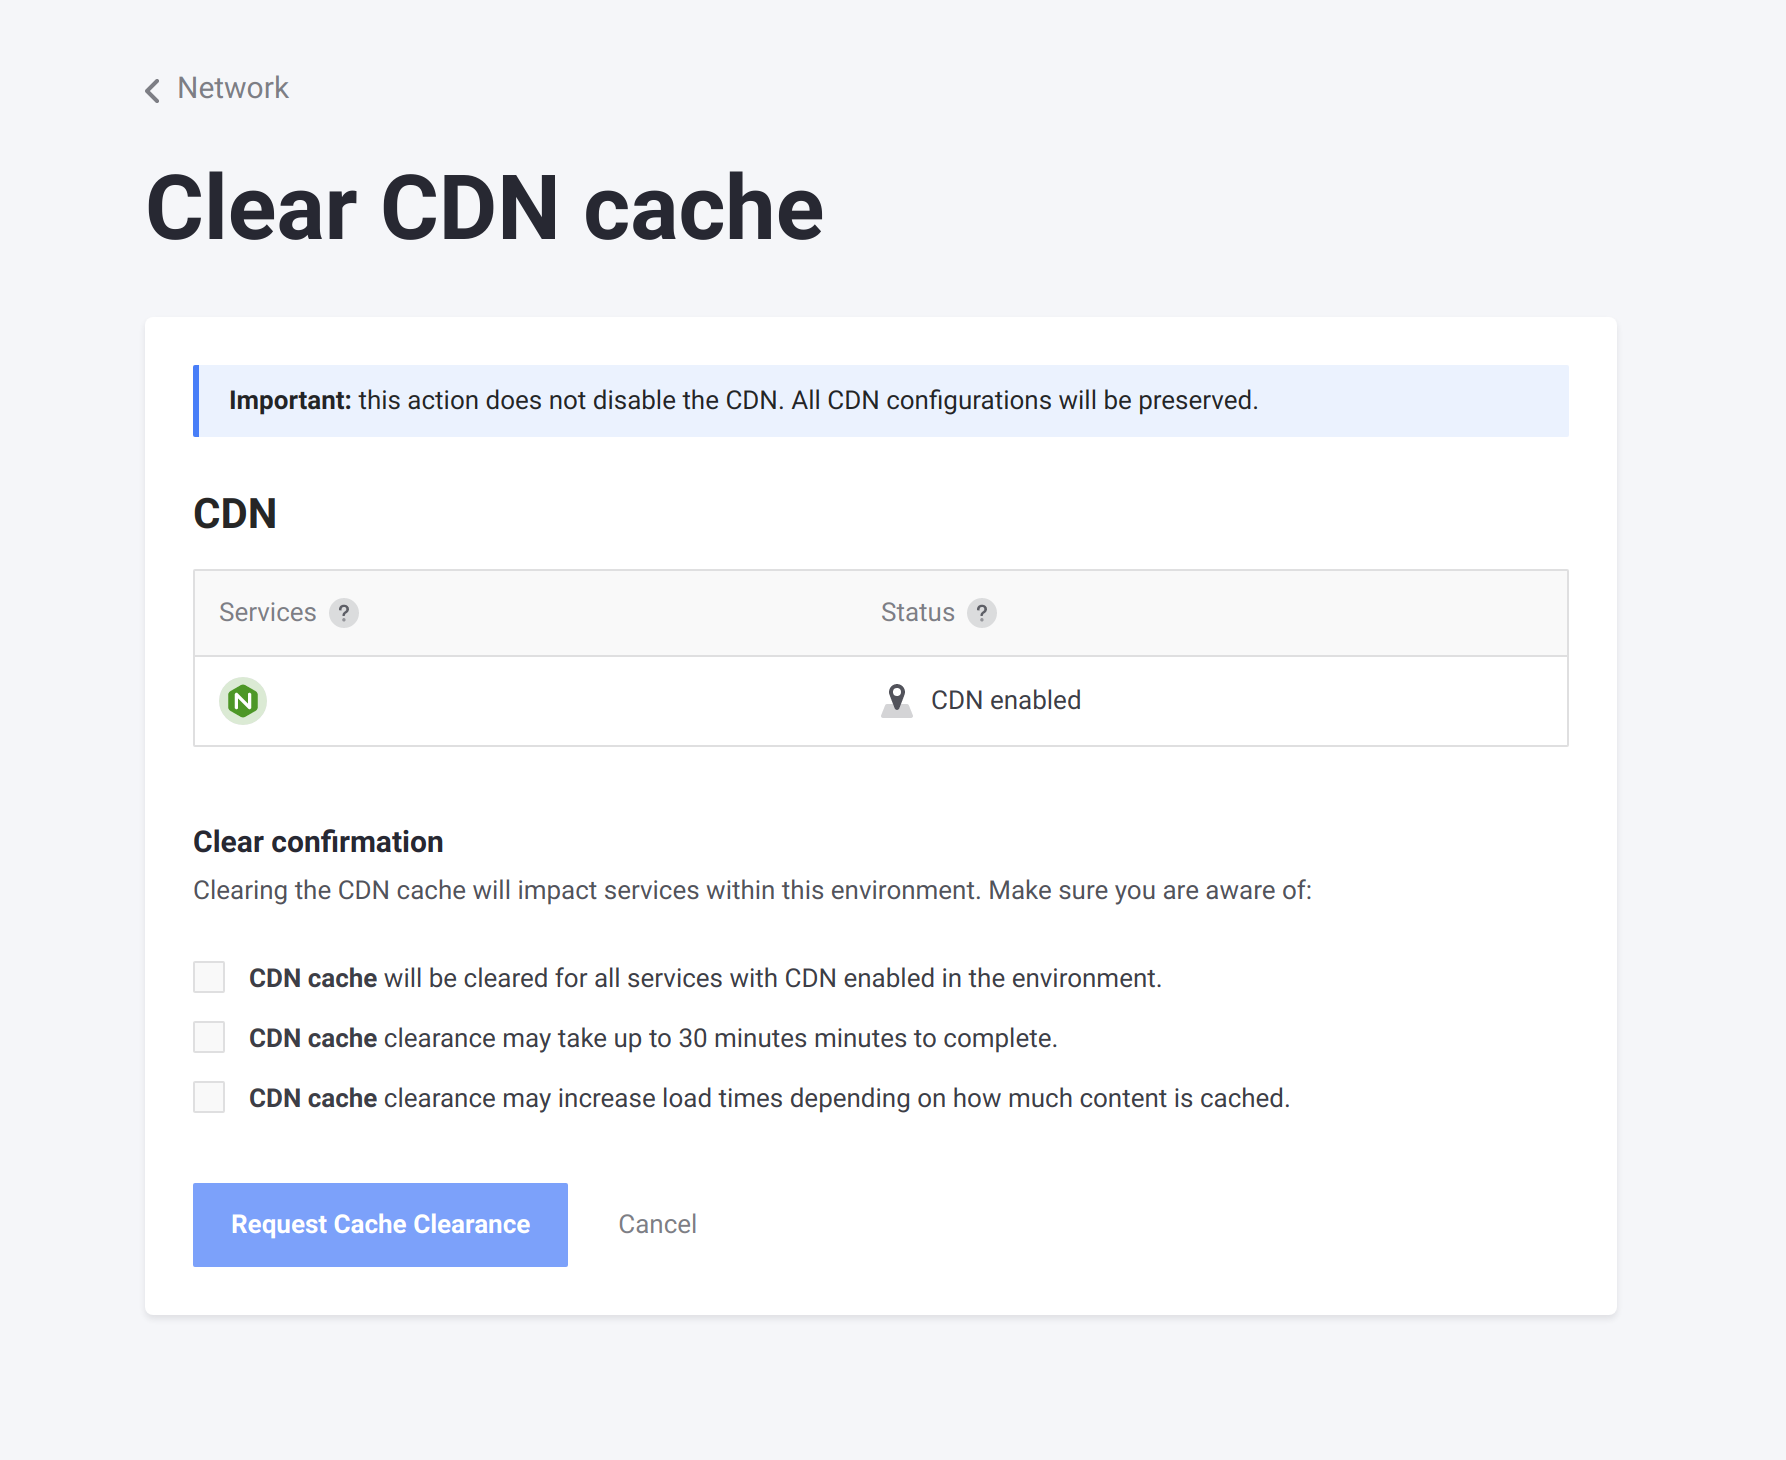 The Clear CDN cache page.